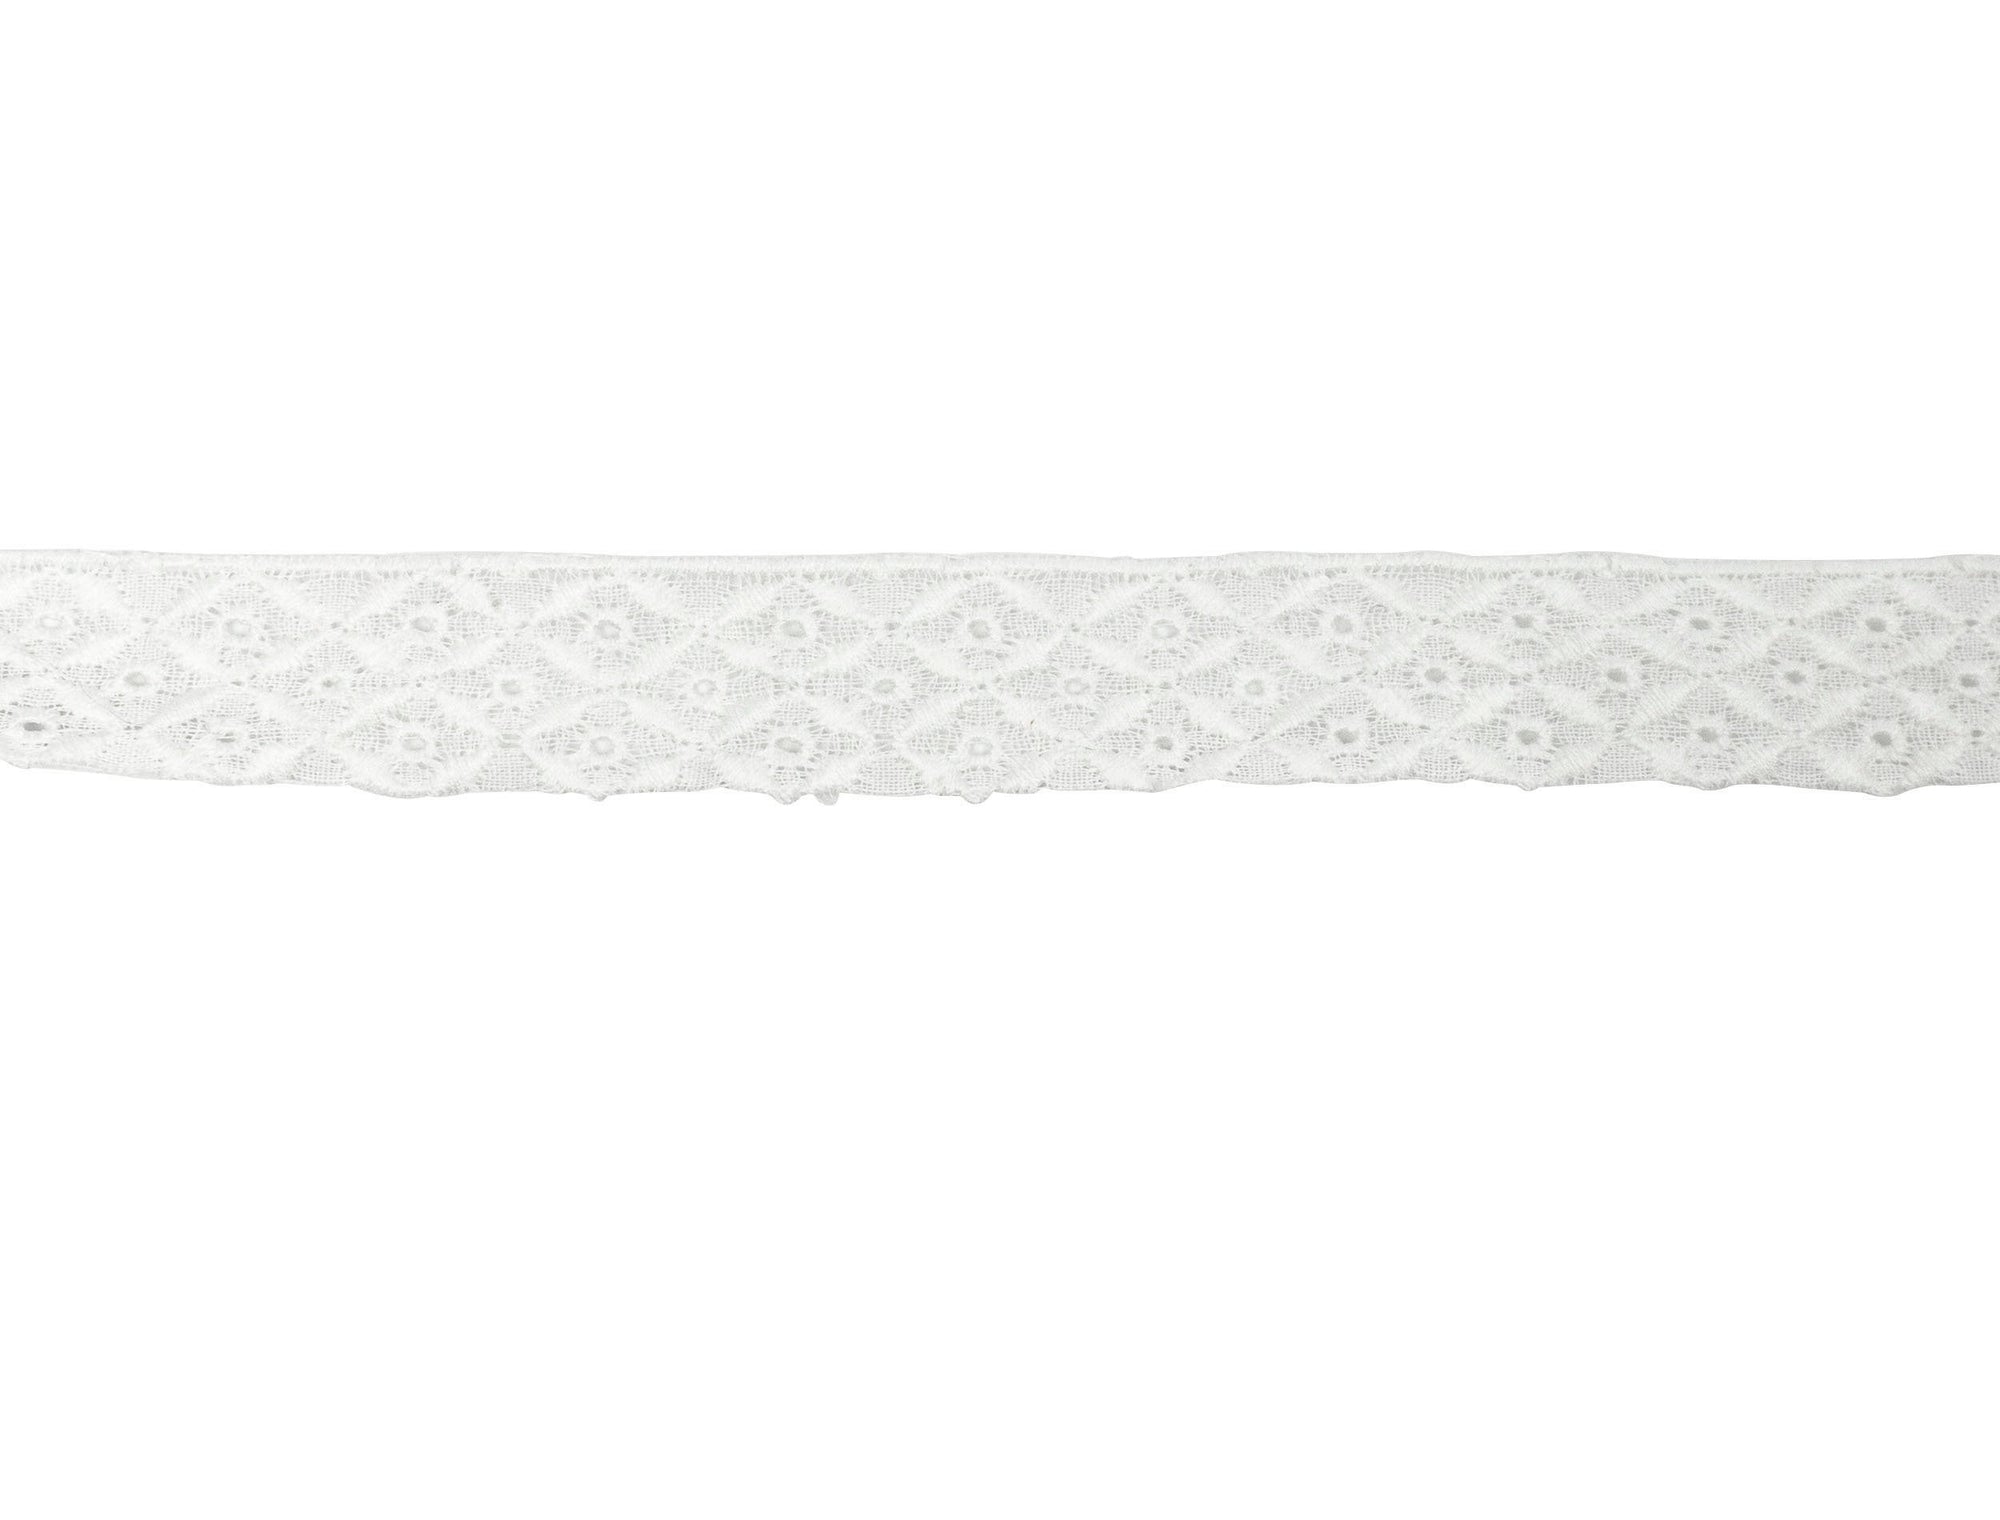 Vintage Lace Trim White Diamond Pattern Eyelet 3/4 - Sold by the